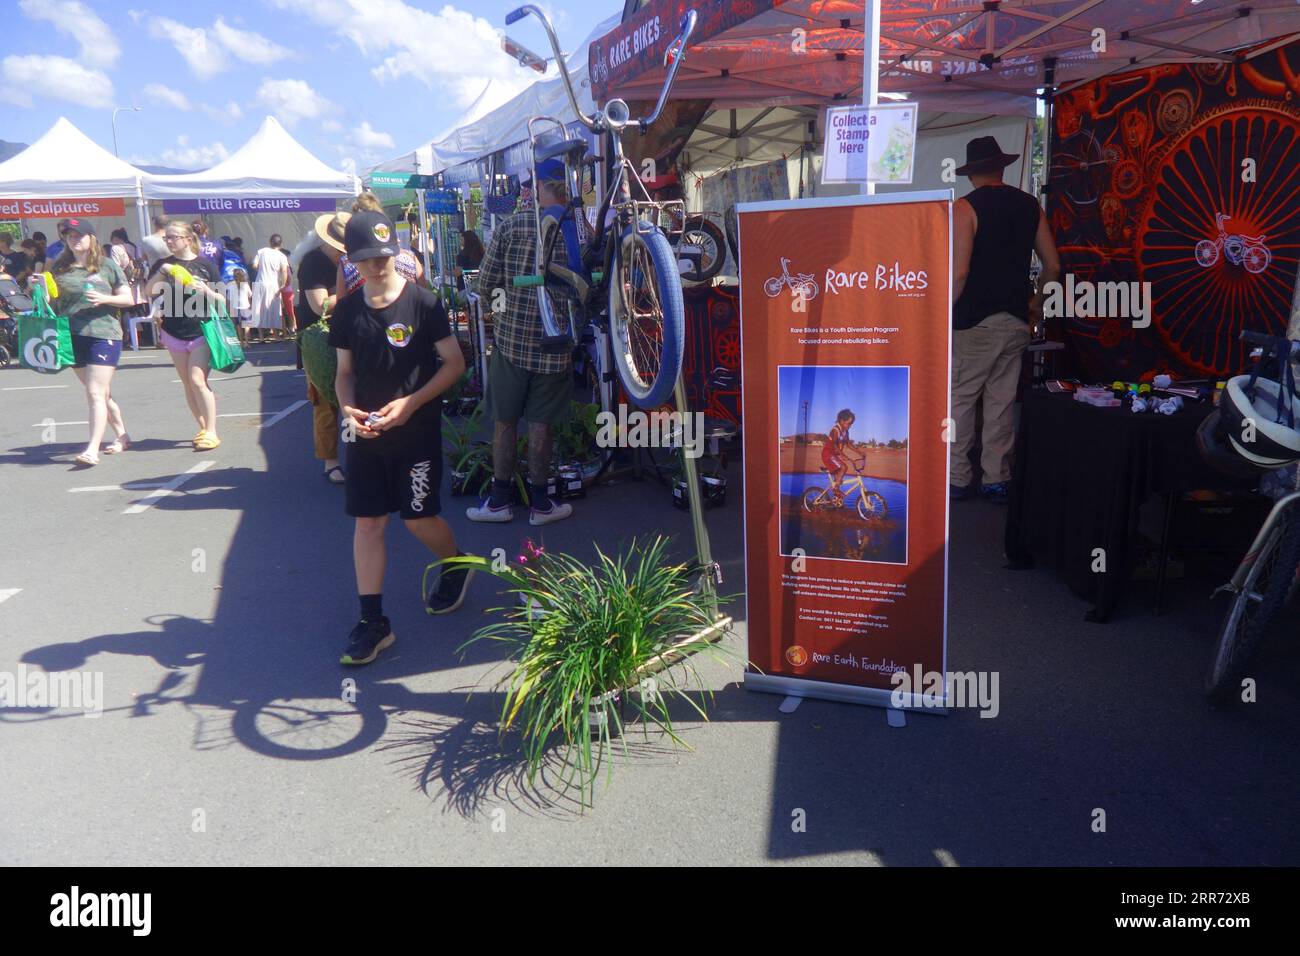 People at Rare Bikes stall at Trash and Treasure Fair, Buyback Shop, Cairns Waste Transfer Facility, Queensland, Australia. No MR or PR Stock Photo